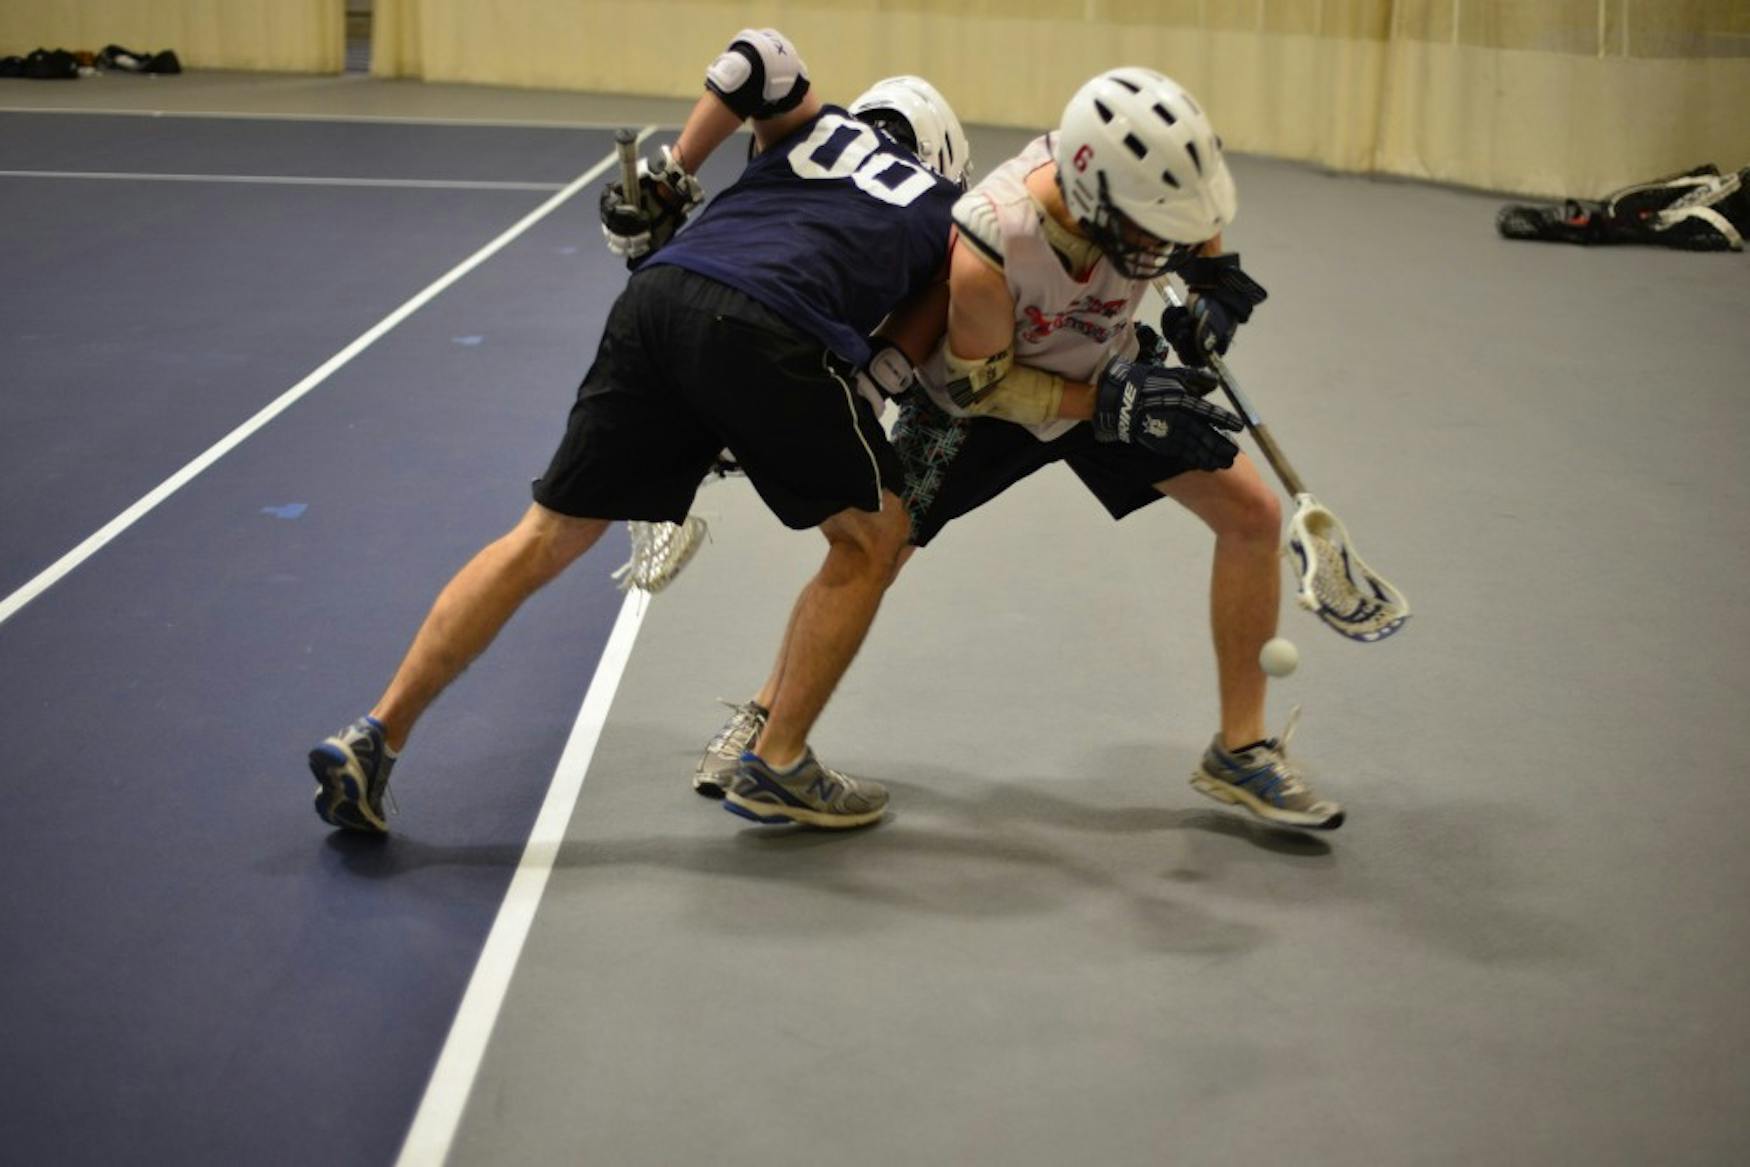 Eric Haavind-Berman ’15 (right) and James Hayward ’16 competing at  Saturday’s lacrosse practice